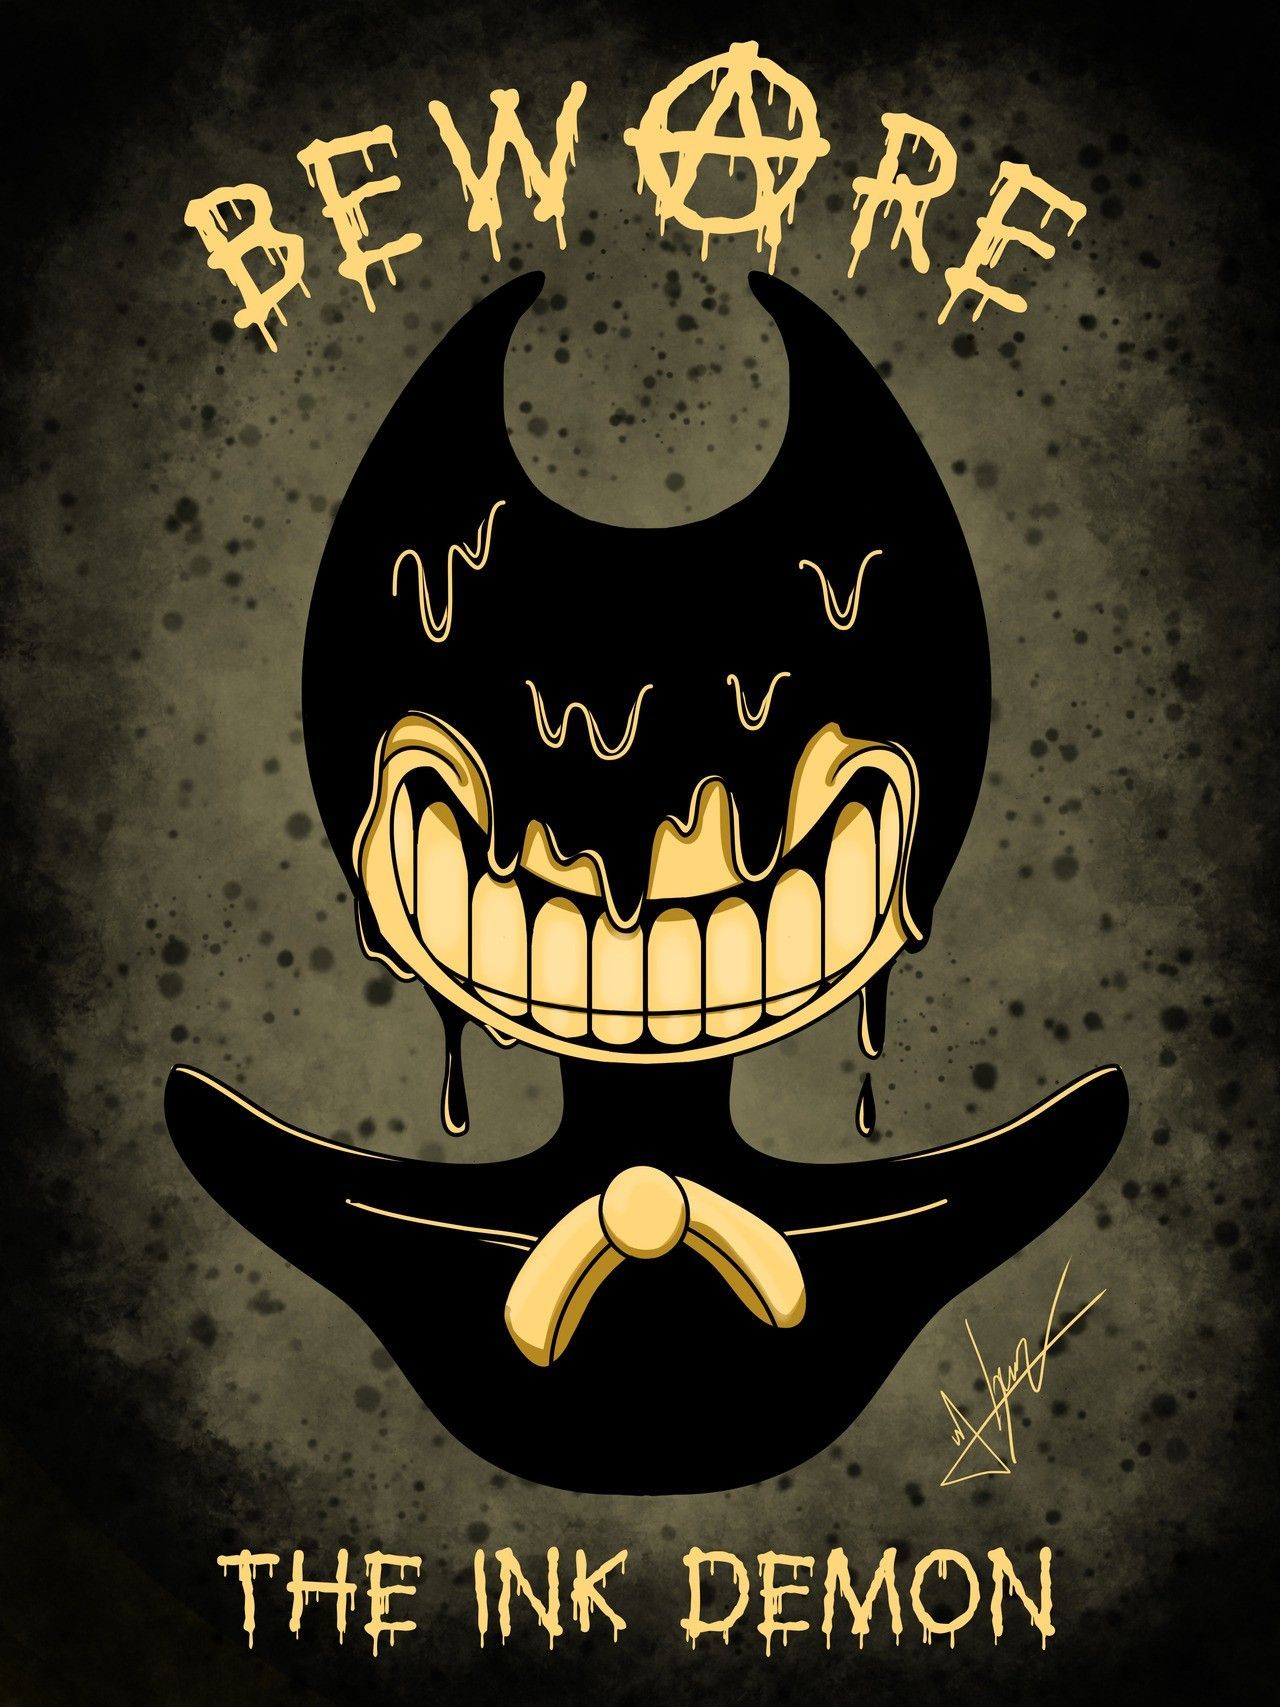 Scary Bendy Wallpapers - Wallpaper Cave